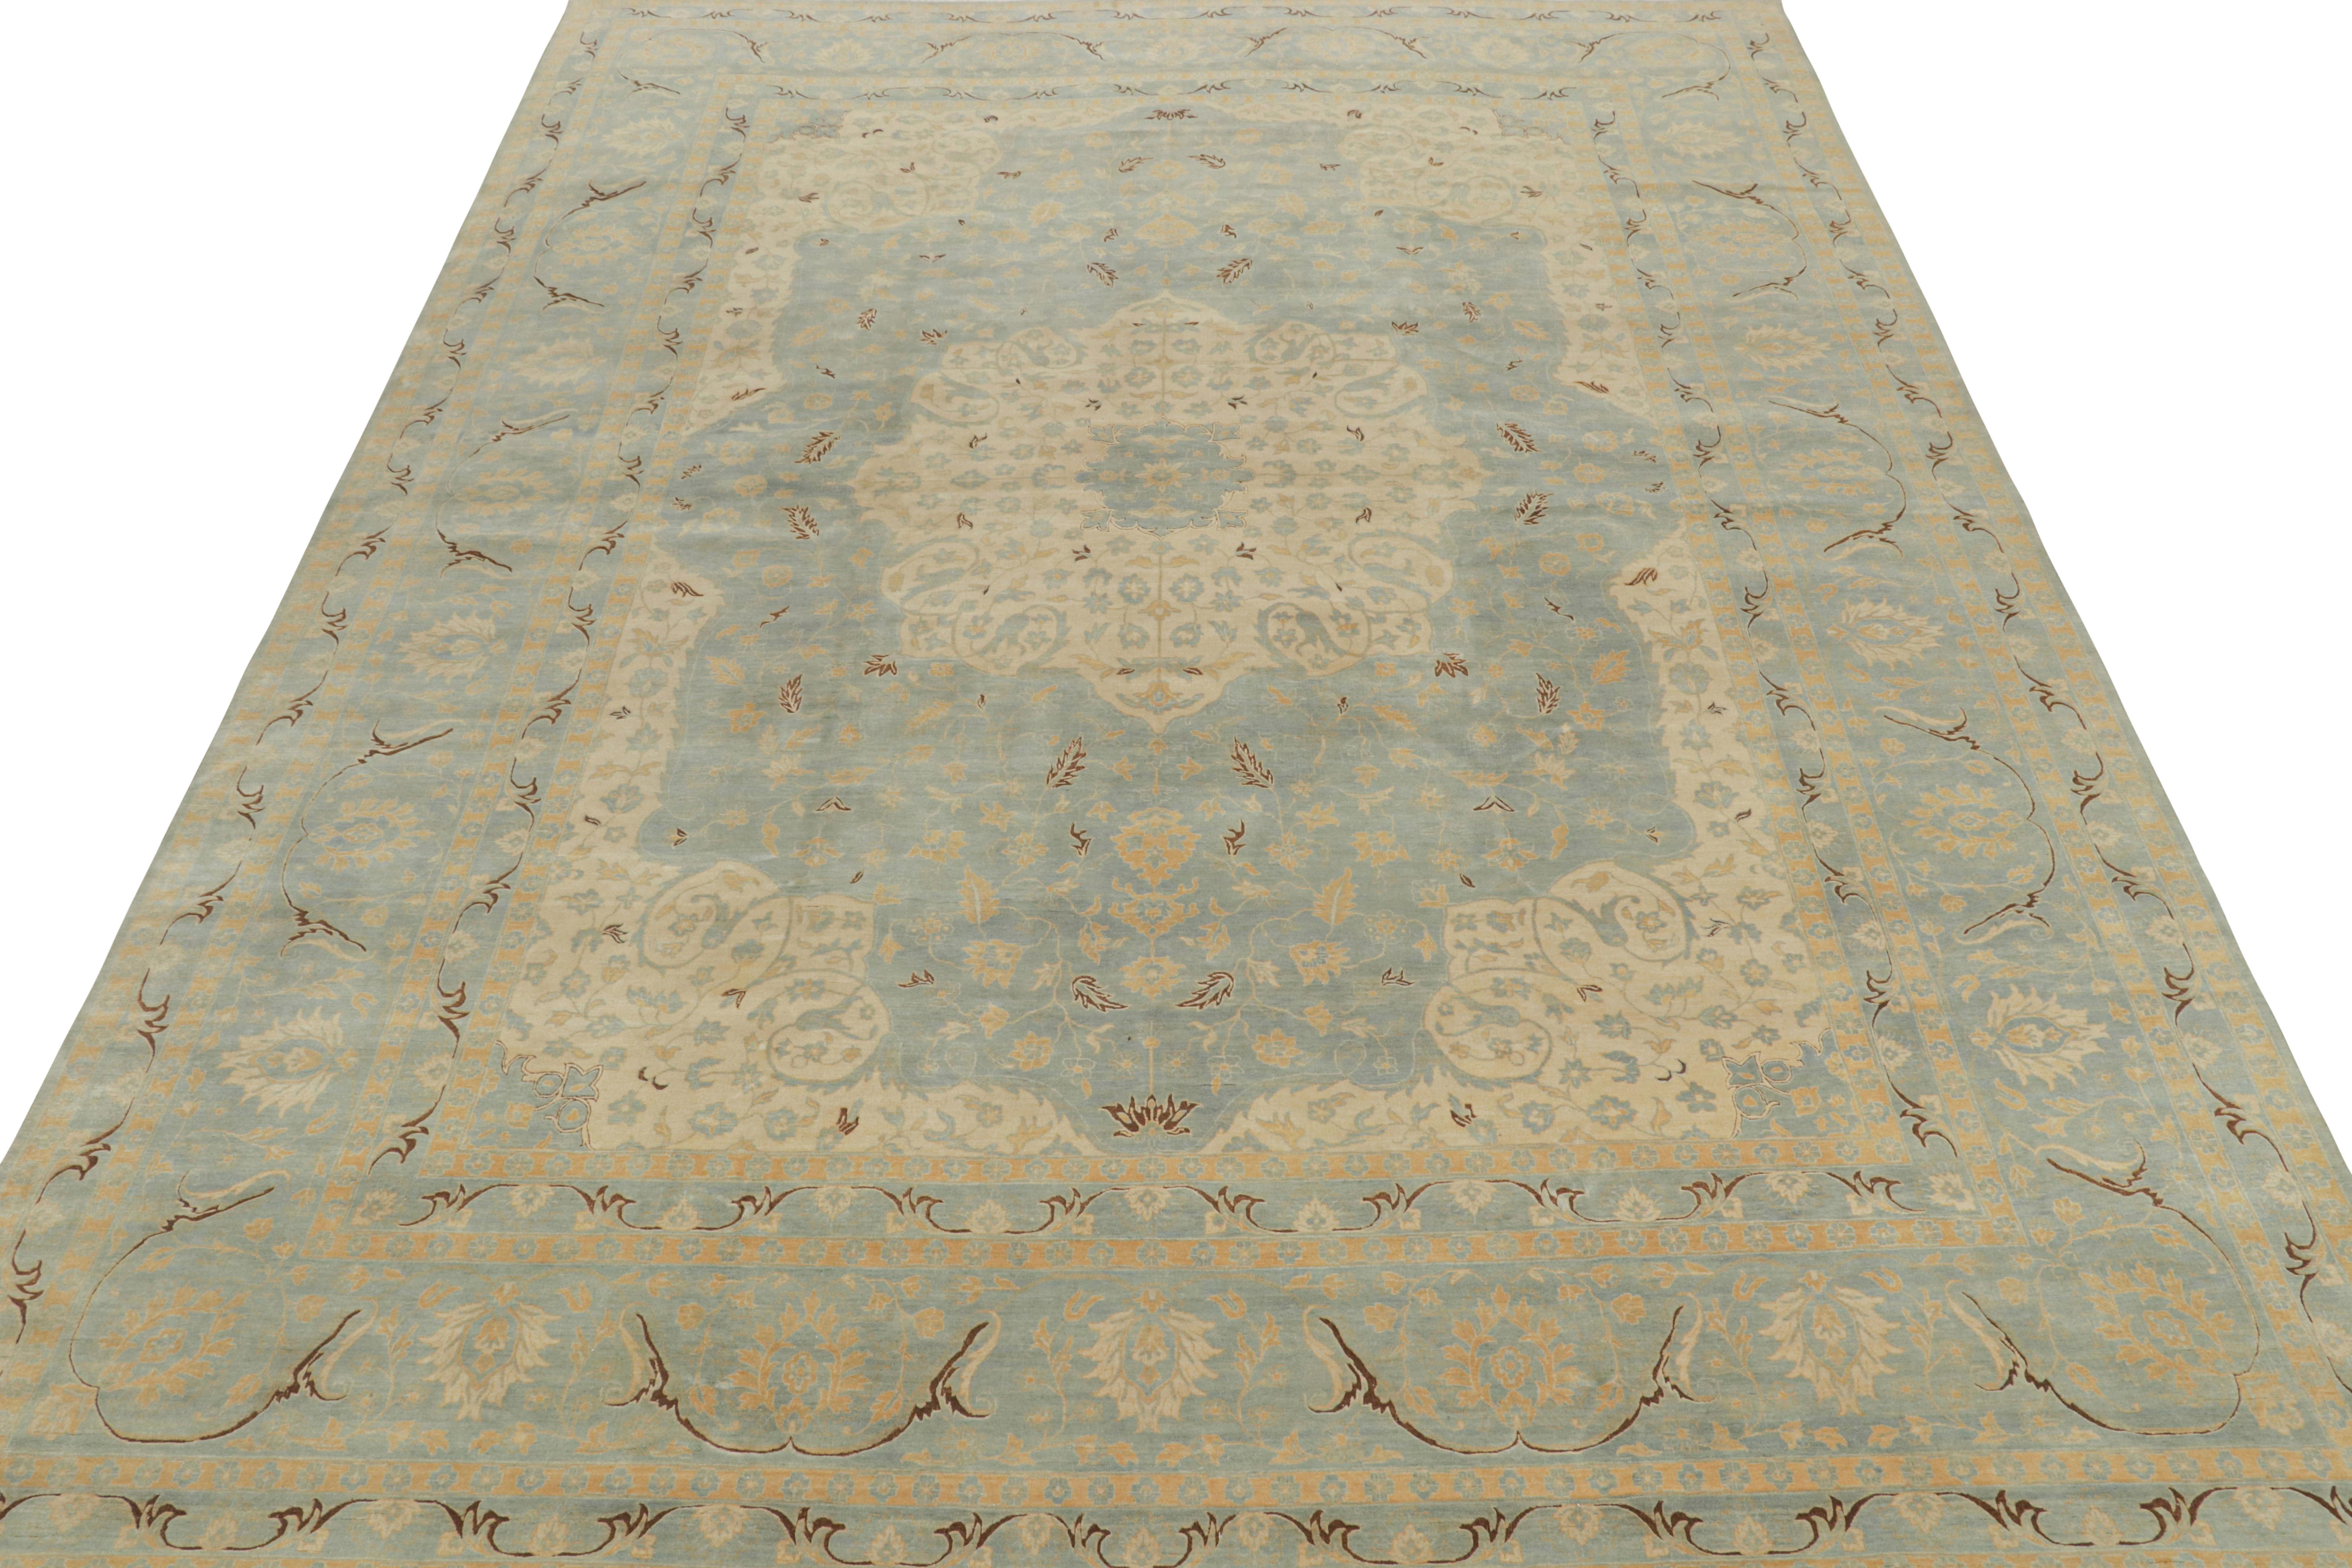 A 12x16 rug inspired from celebrated Tabriz rug styles, from Rug & Kilim’s Modern Classics Collection. Hand-knotted in wool, playing an exceptional blue beside ivory and beige-brown floral patterns with classic grace.
Further On the Design:
Keen